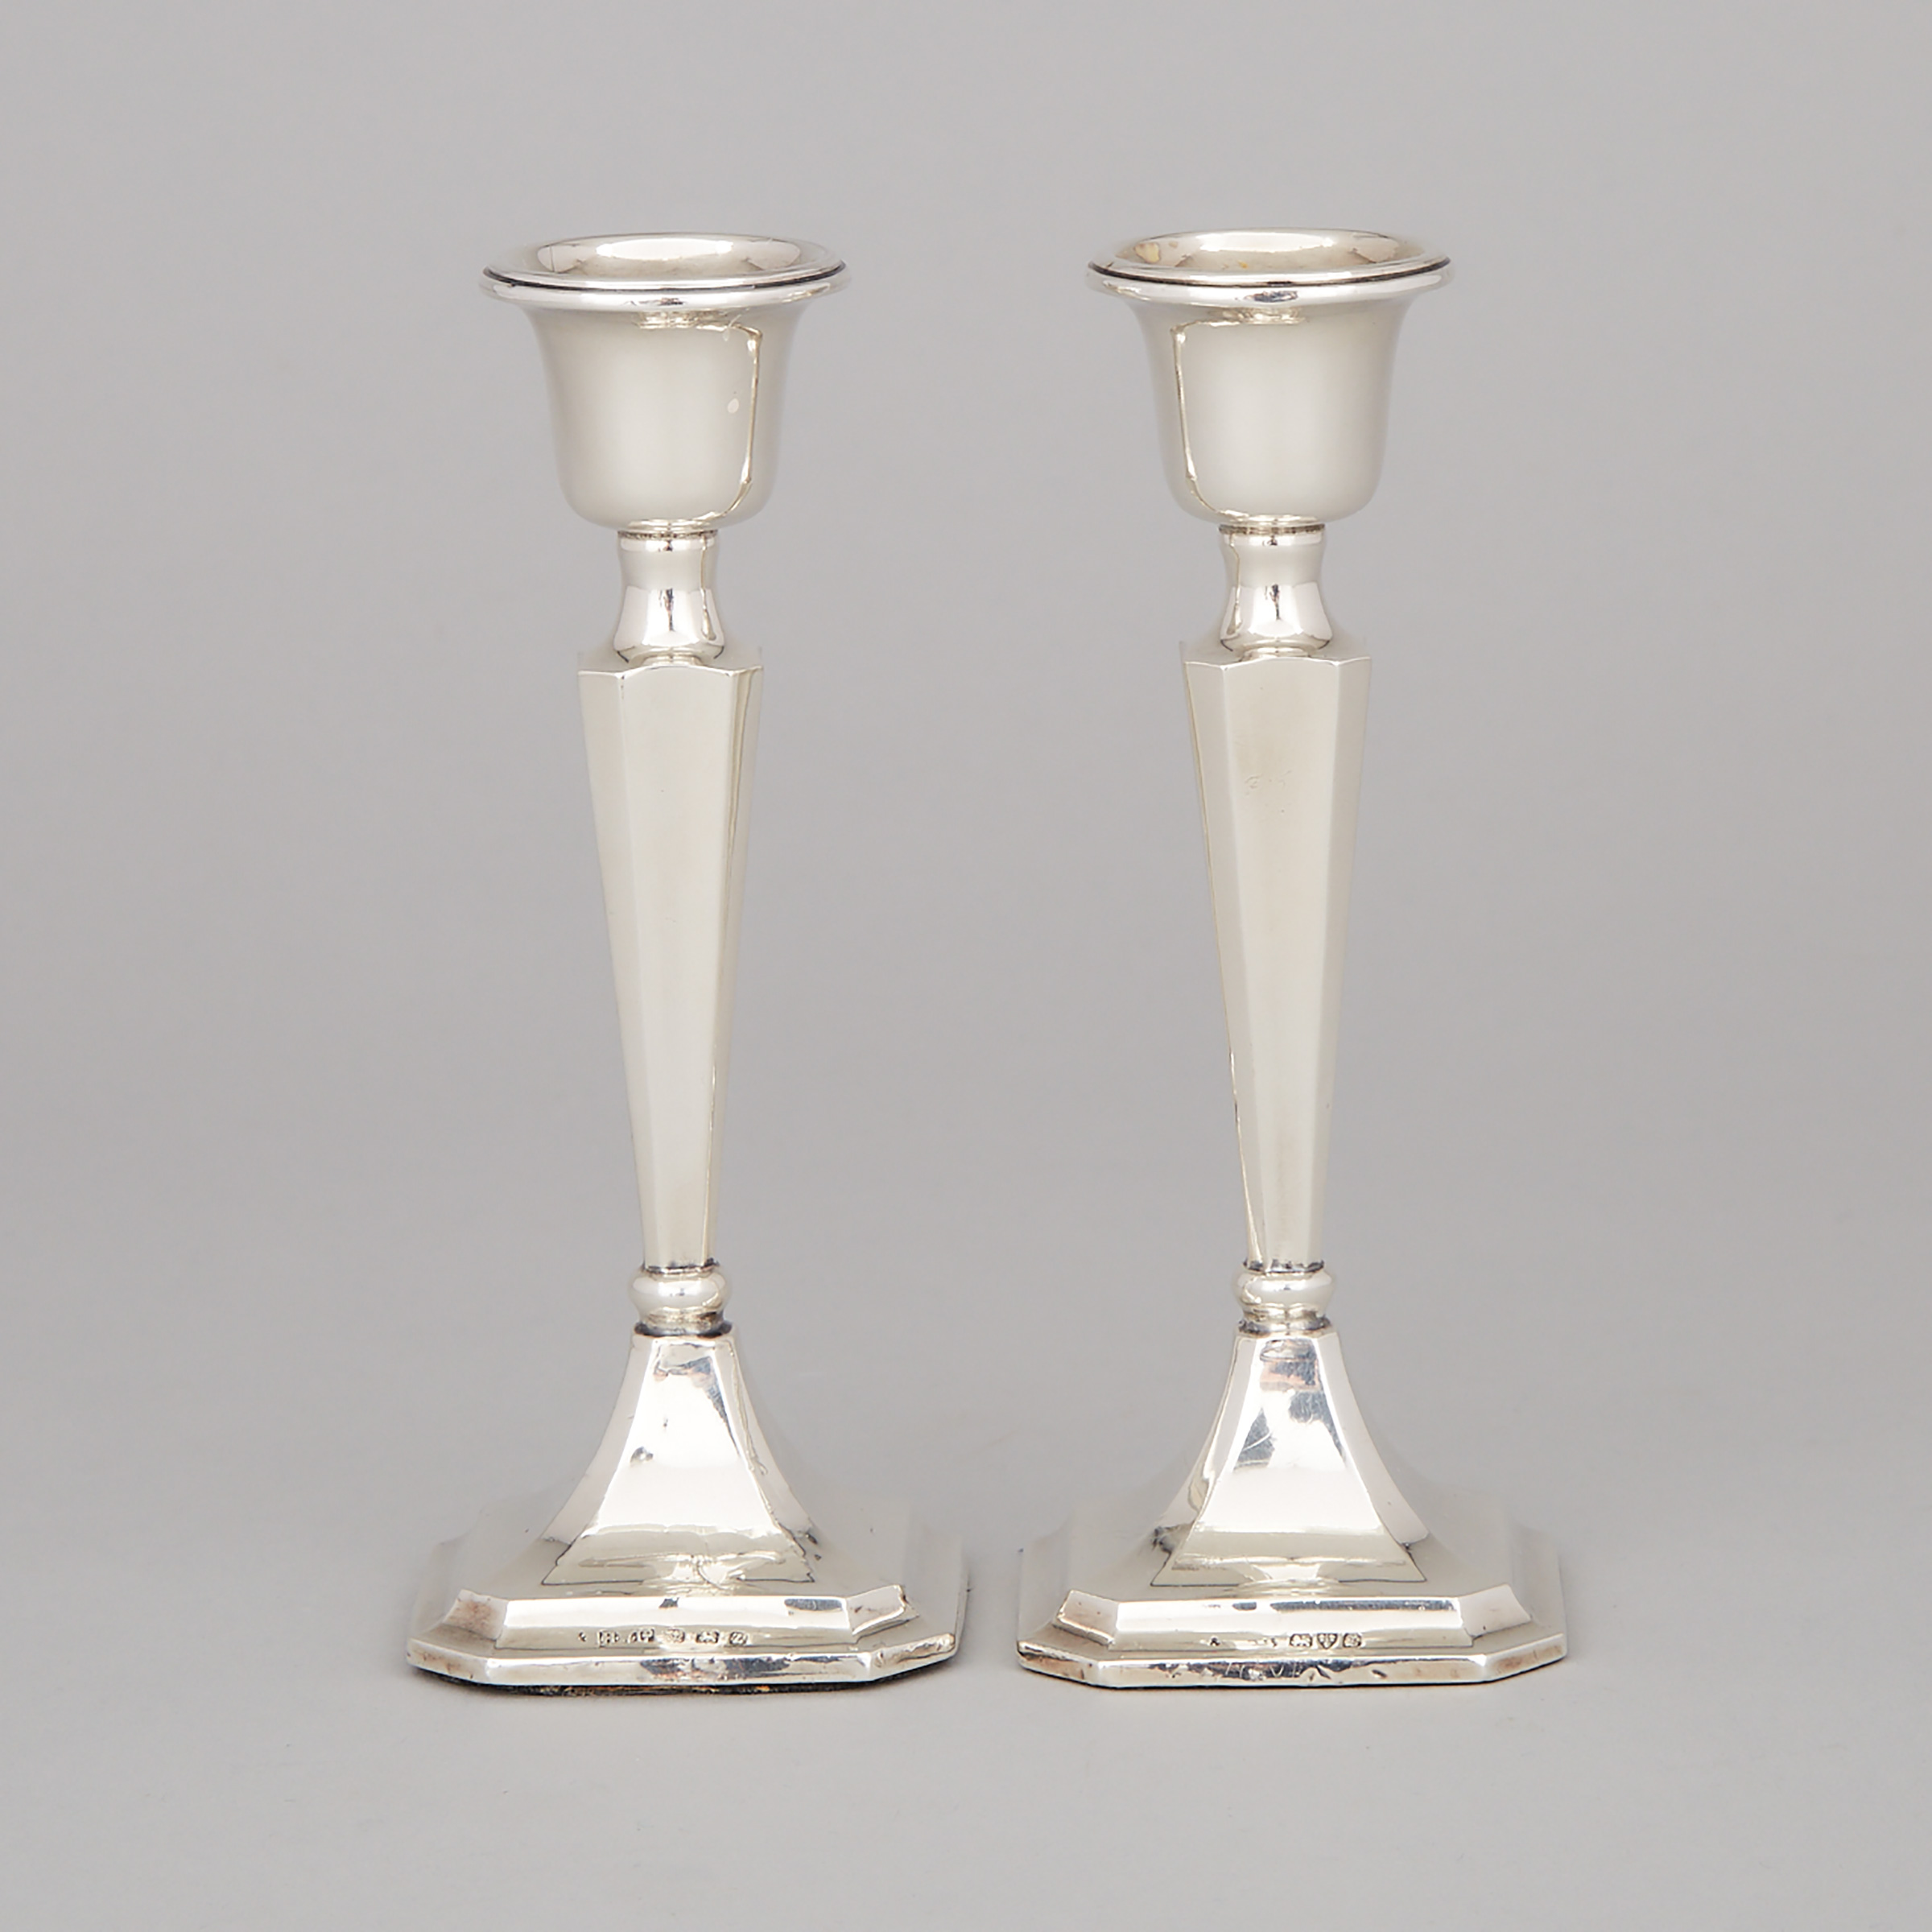 Pair of English Silver Desk Candlesticks, Birmingham, 1924 and Chester, 1925